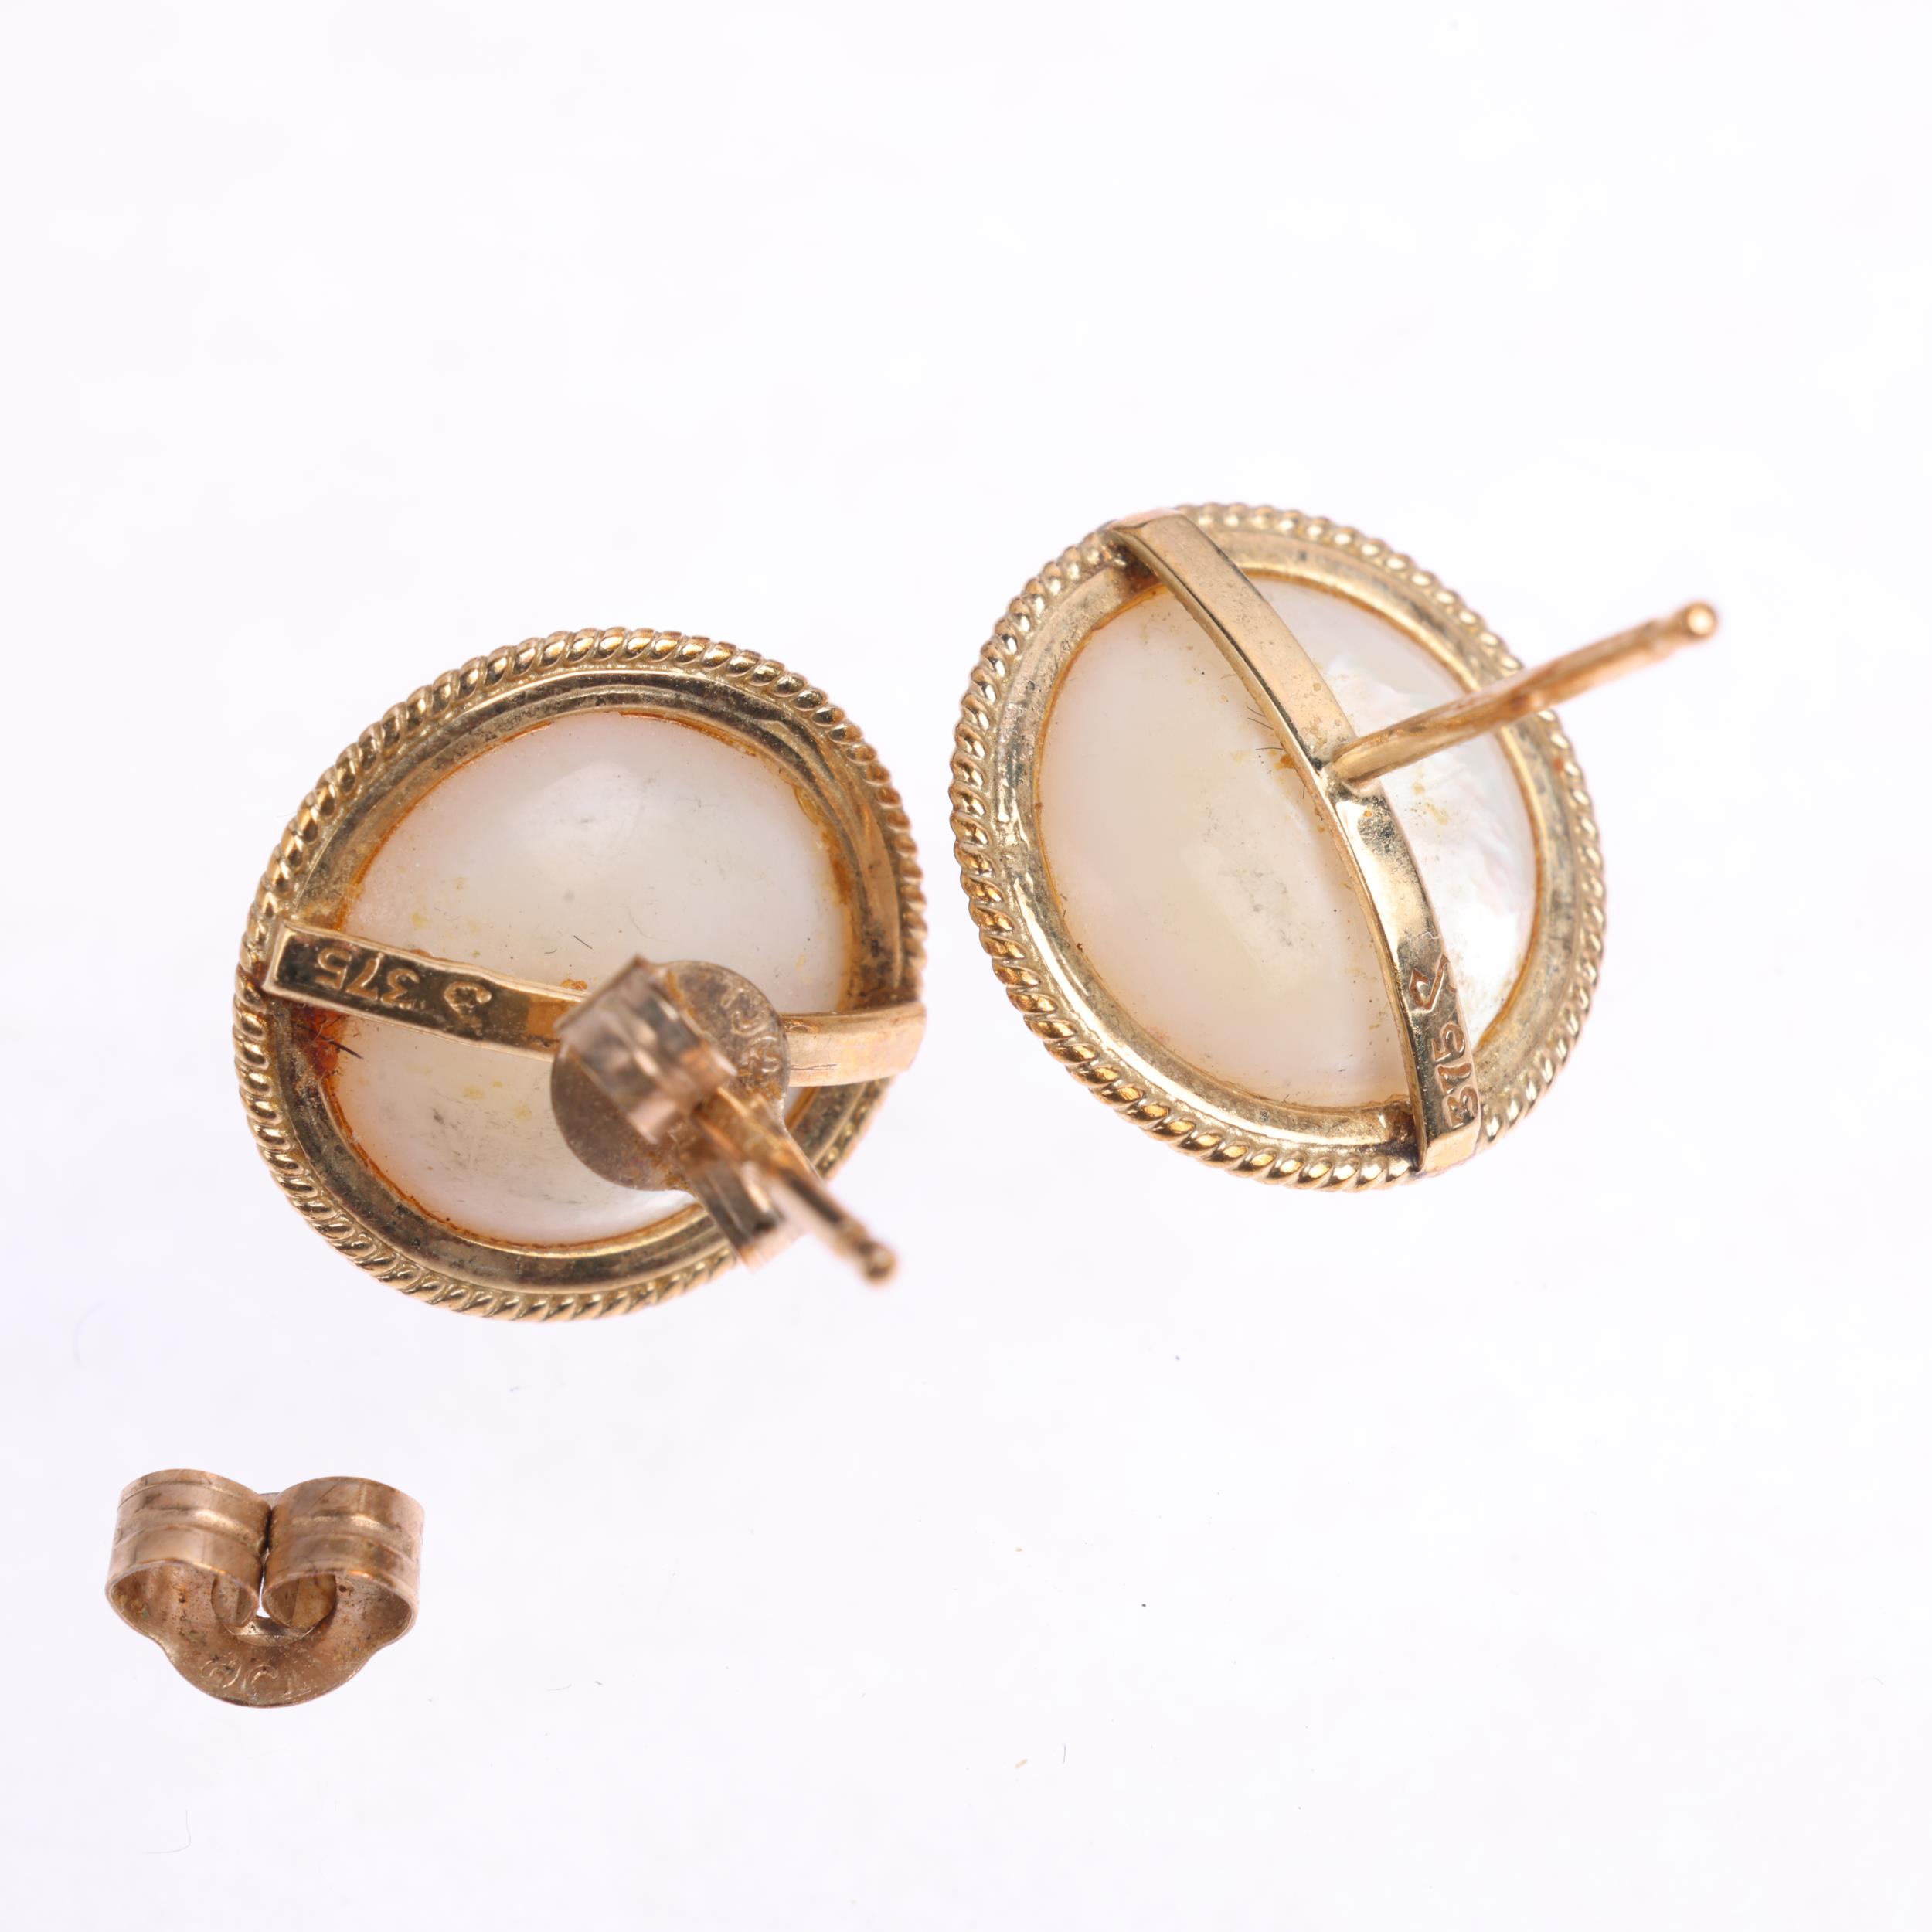 A 9ct gold Mabe pearl pendant and earring set, pendant 20mm, stud earrings 13.3mm, 5g total (2) - Image 3 of 4